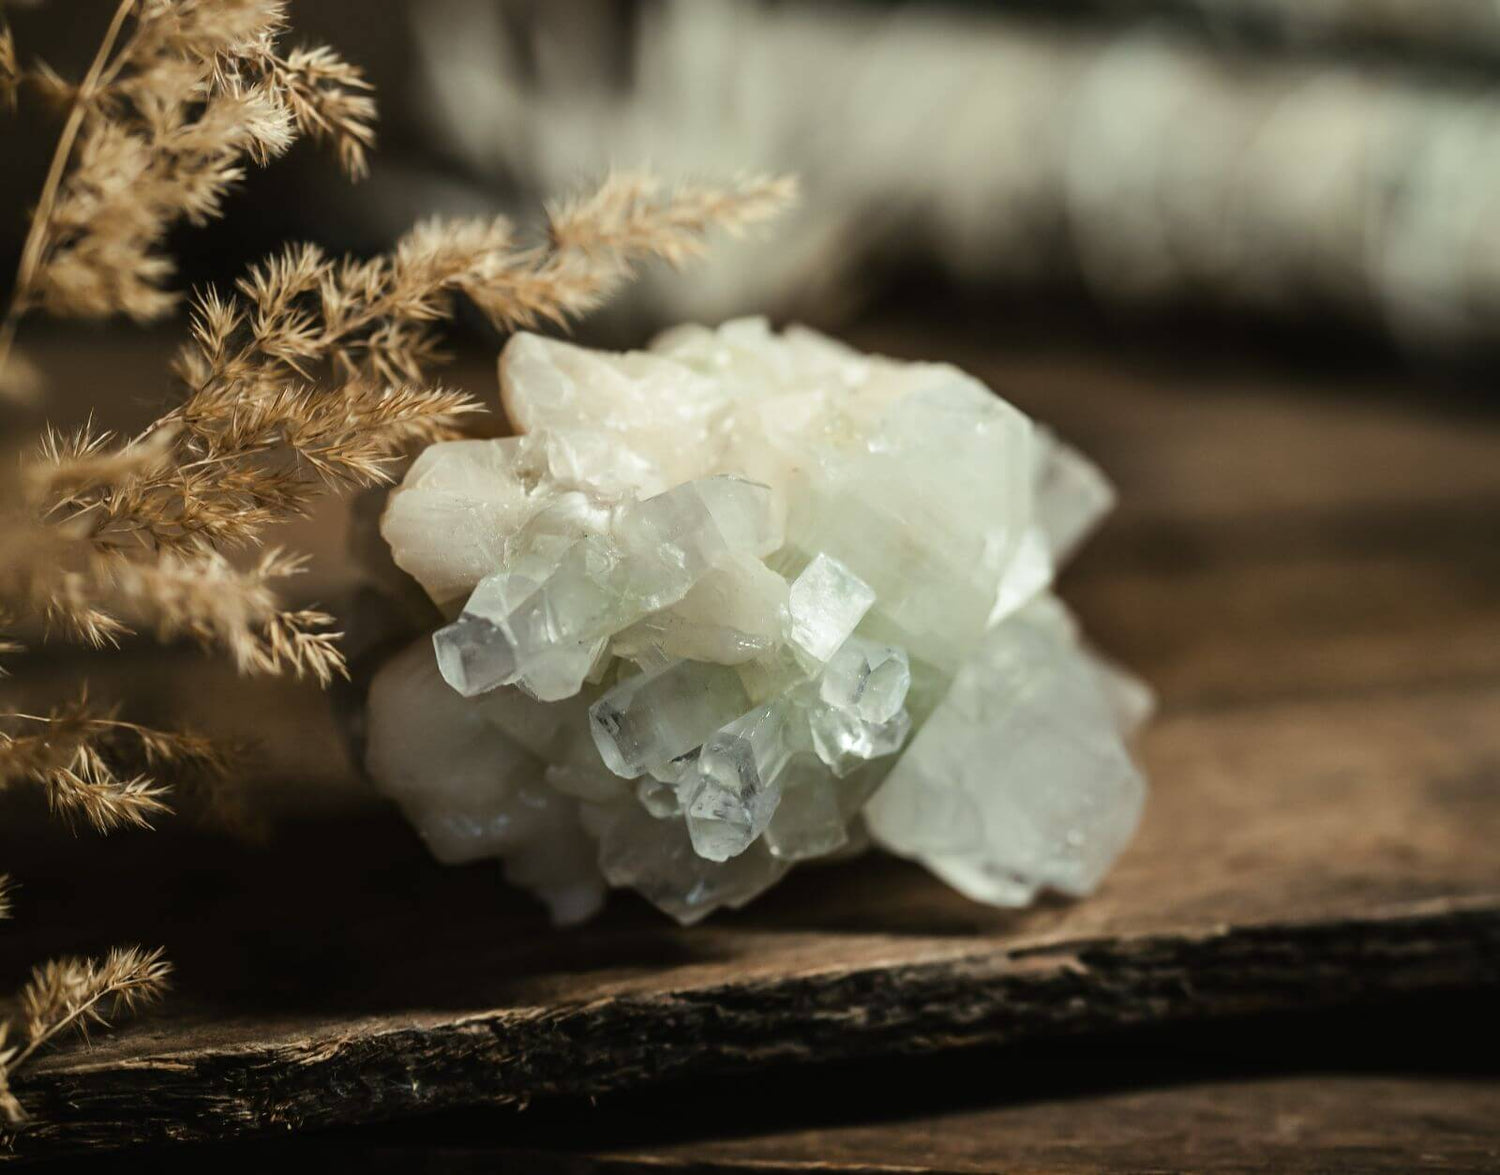 Apophyllite Meaning: Healing Properties and Everyday Uses